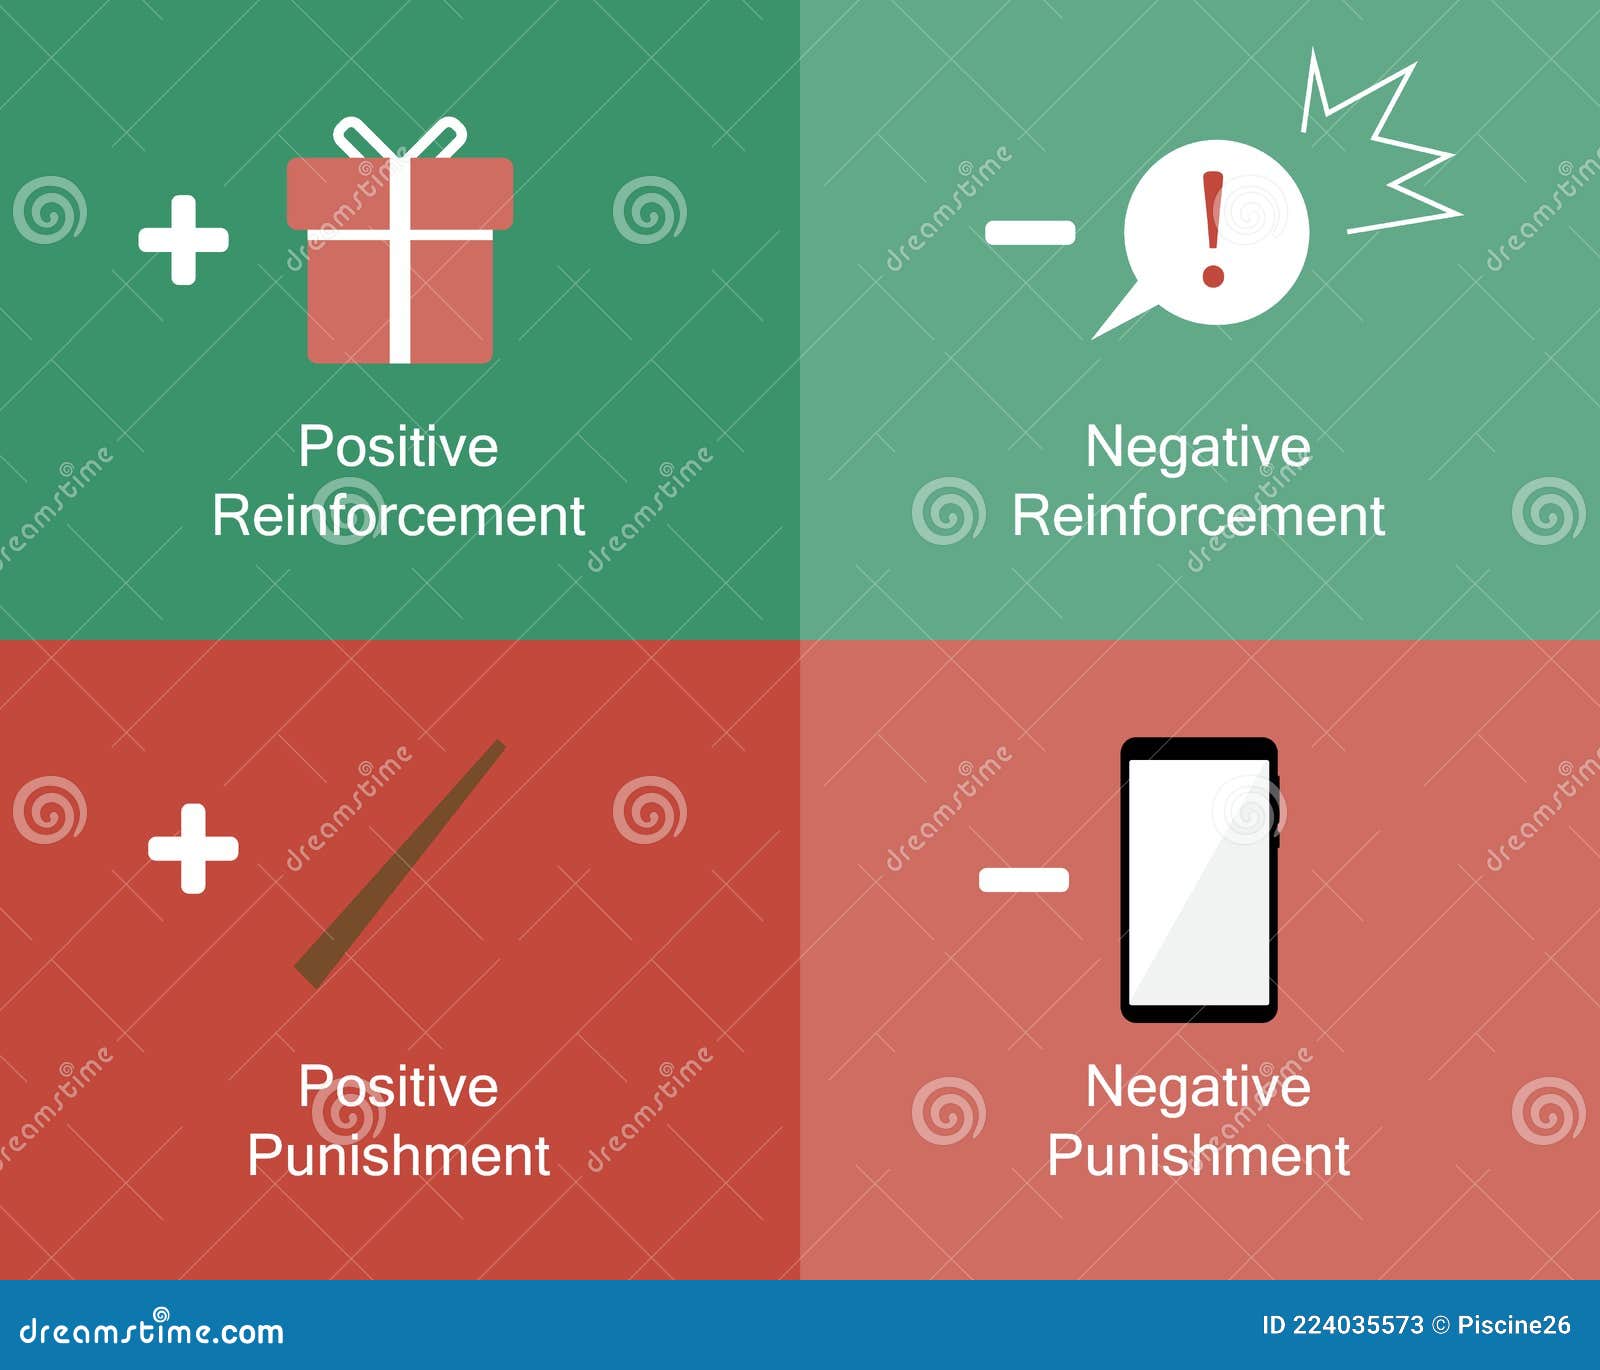 positive and negative reinforcement theory